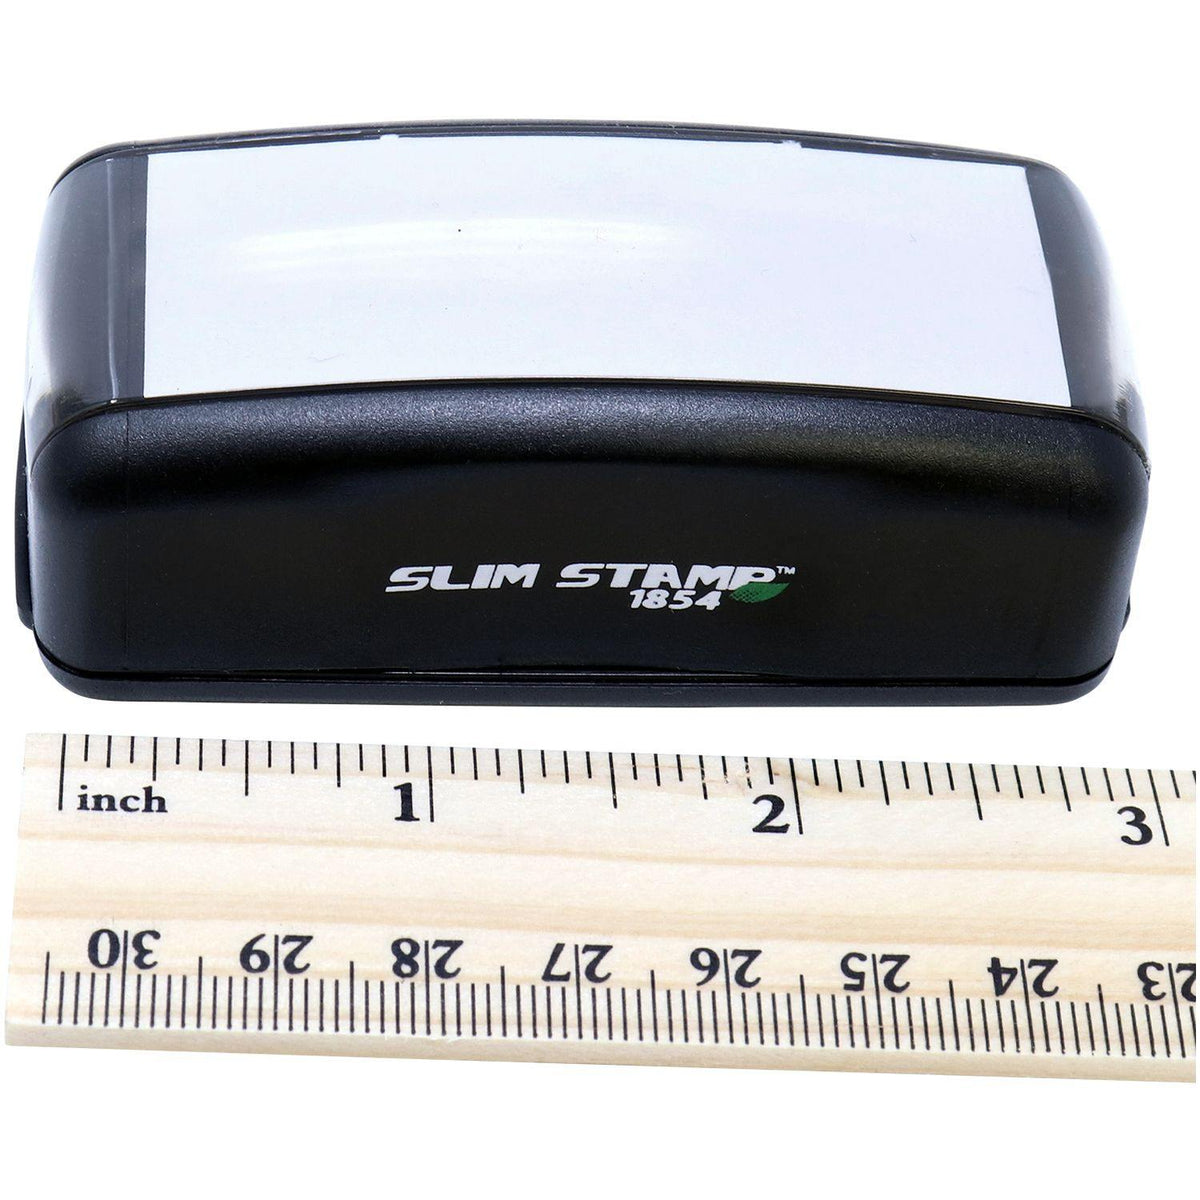 Measurement Large Pre-Inked Bright Idea Stamp with Ruler